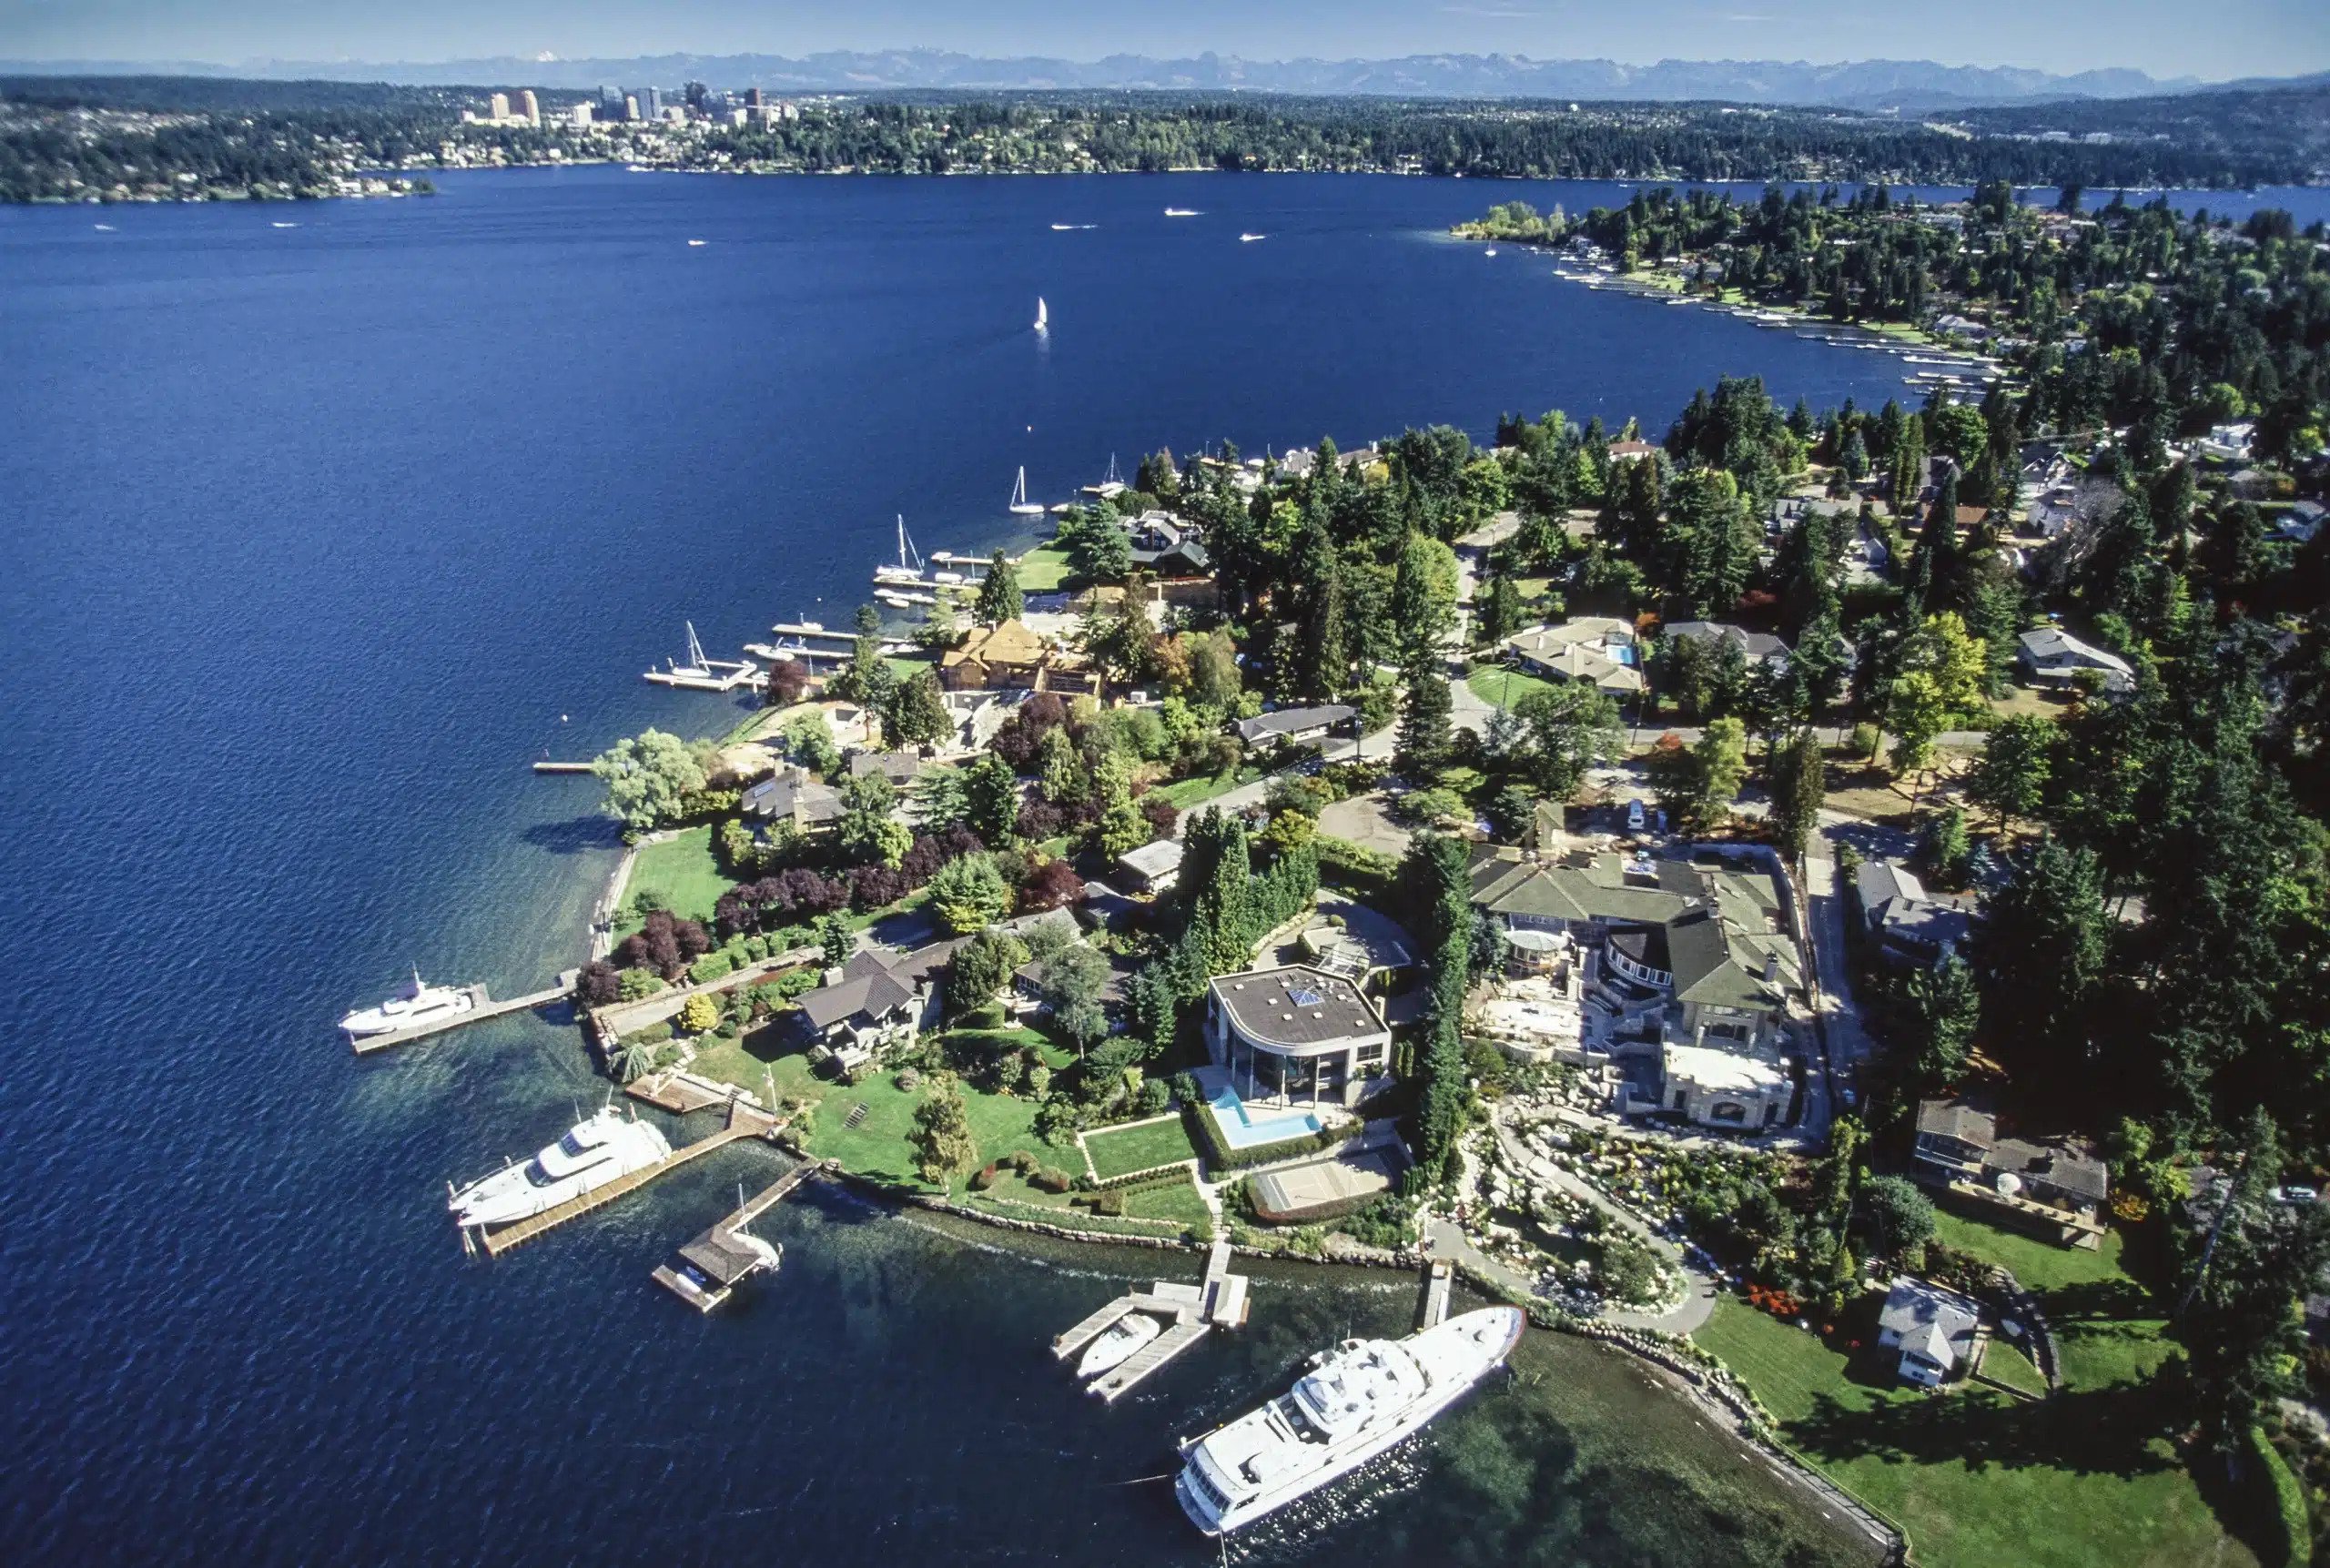 The ocean with houses and boats beside it in Mercer Island